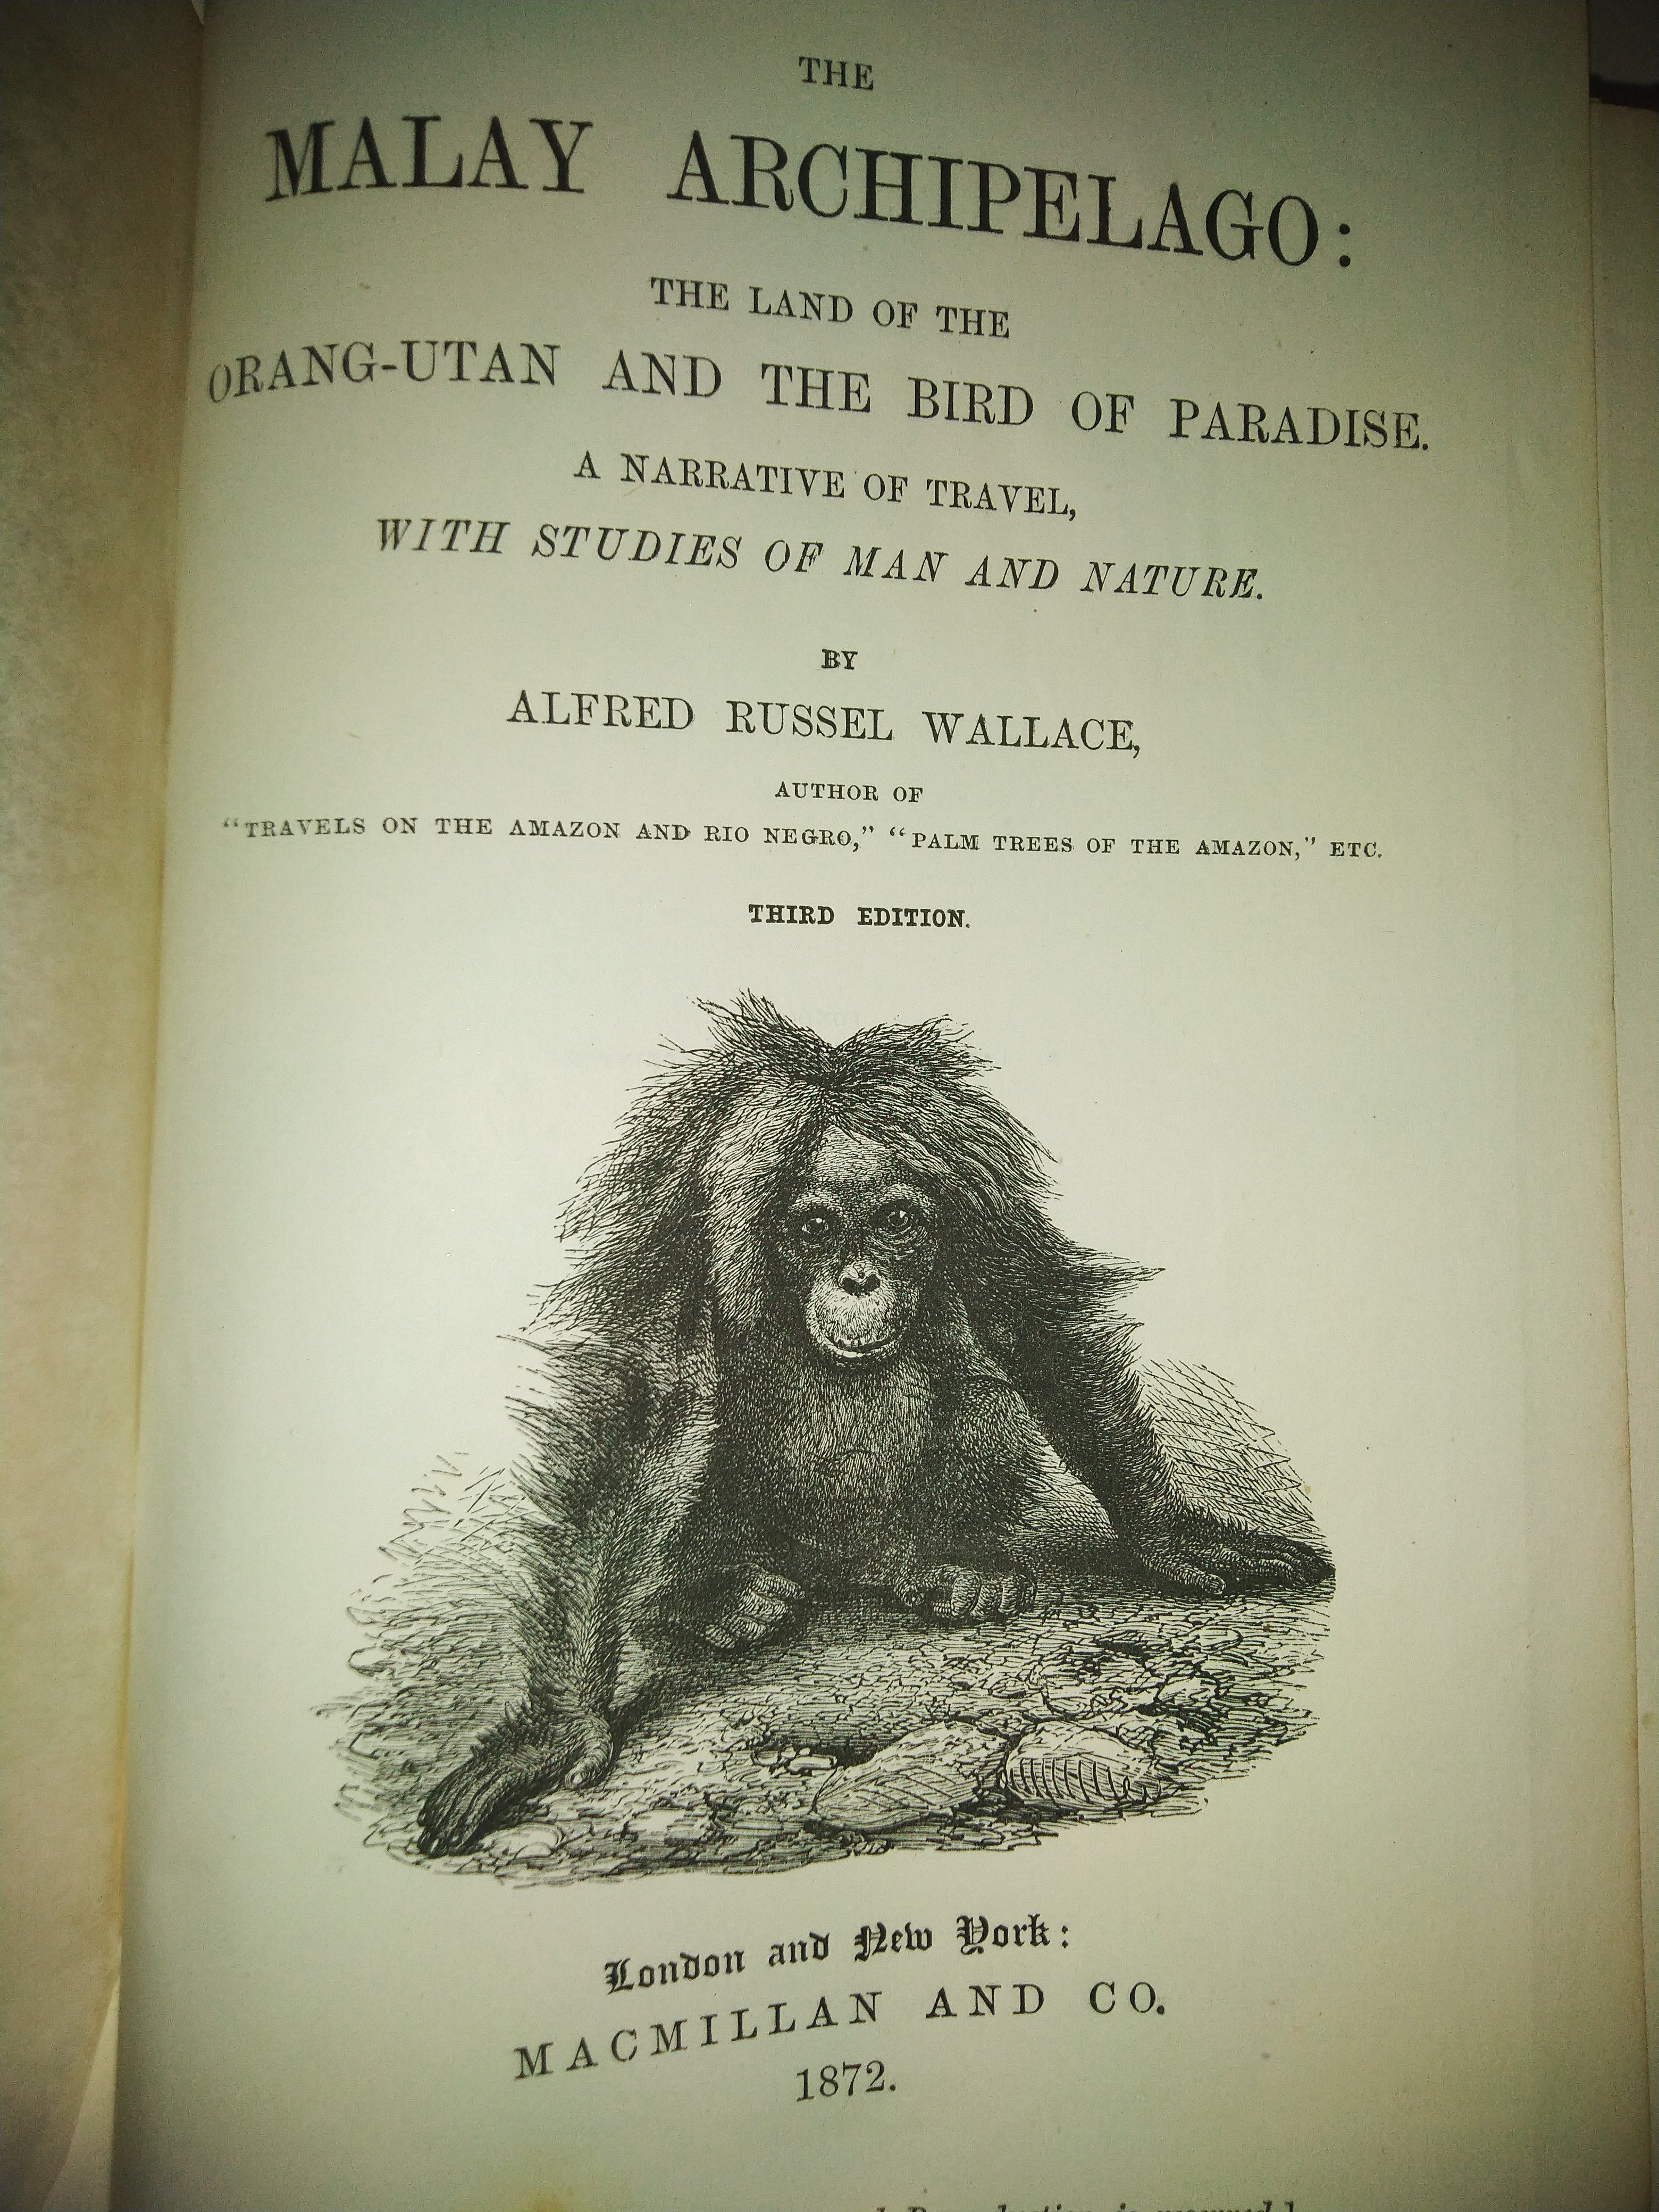 The Malay Archipelago – Alfred Russel Wallace (1872) (3rd ed)